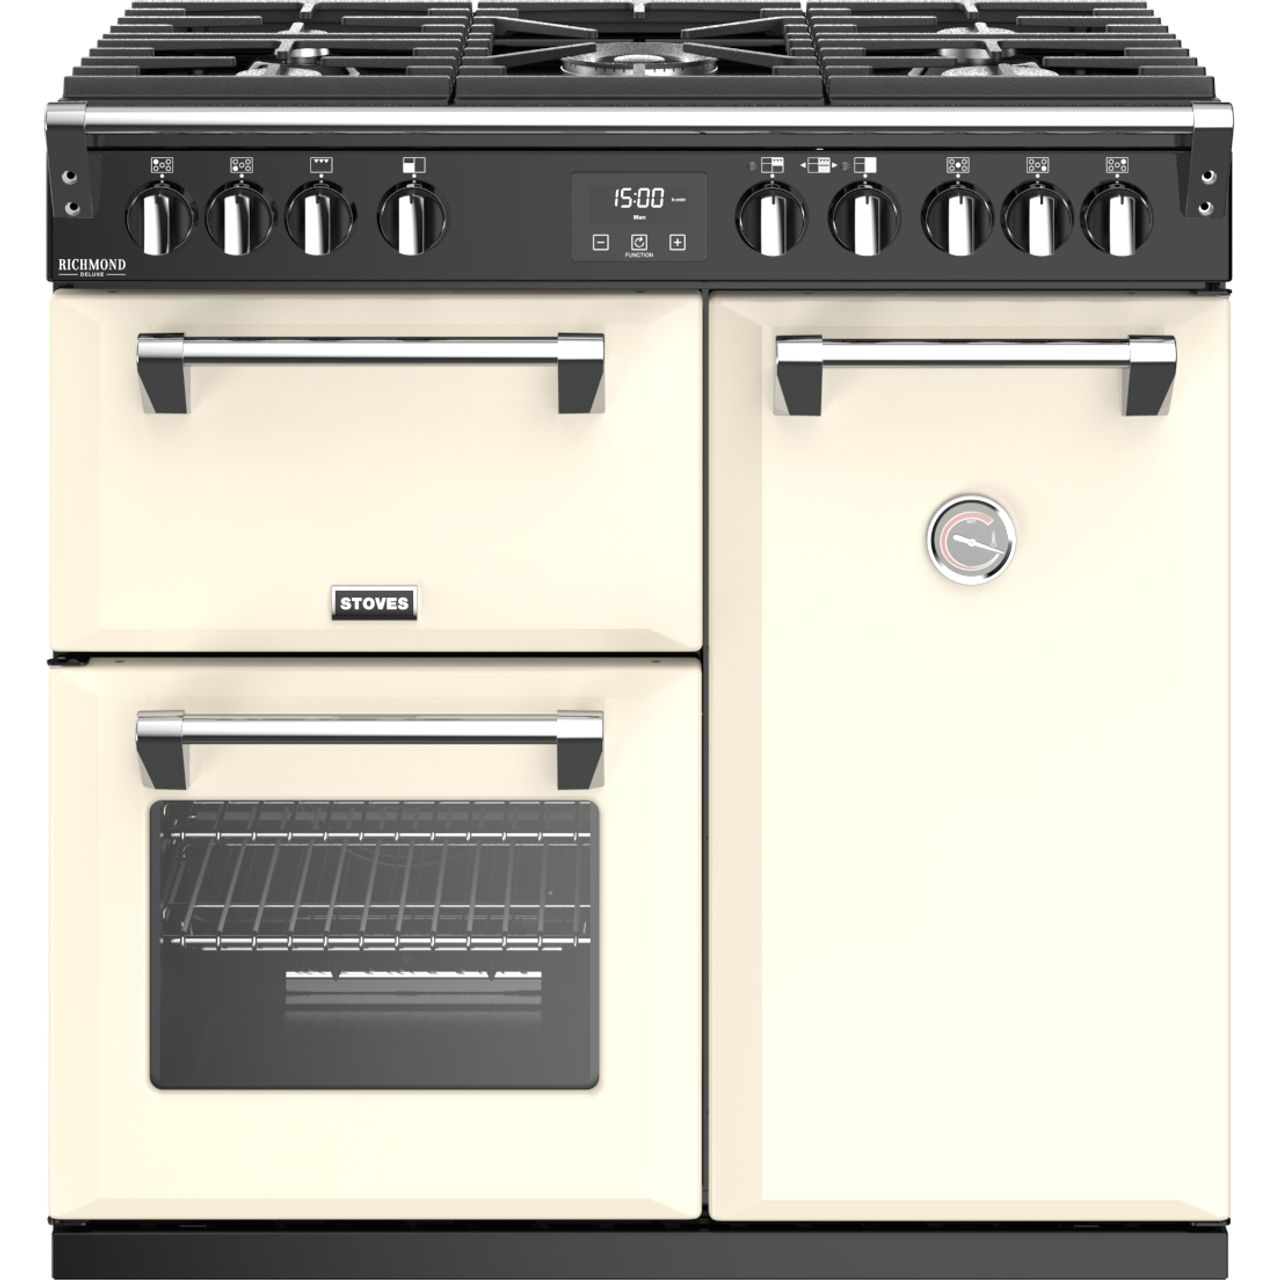 Stoves Richmond Deluxe S900G 90cm Gas Range Cooker Review